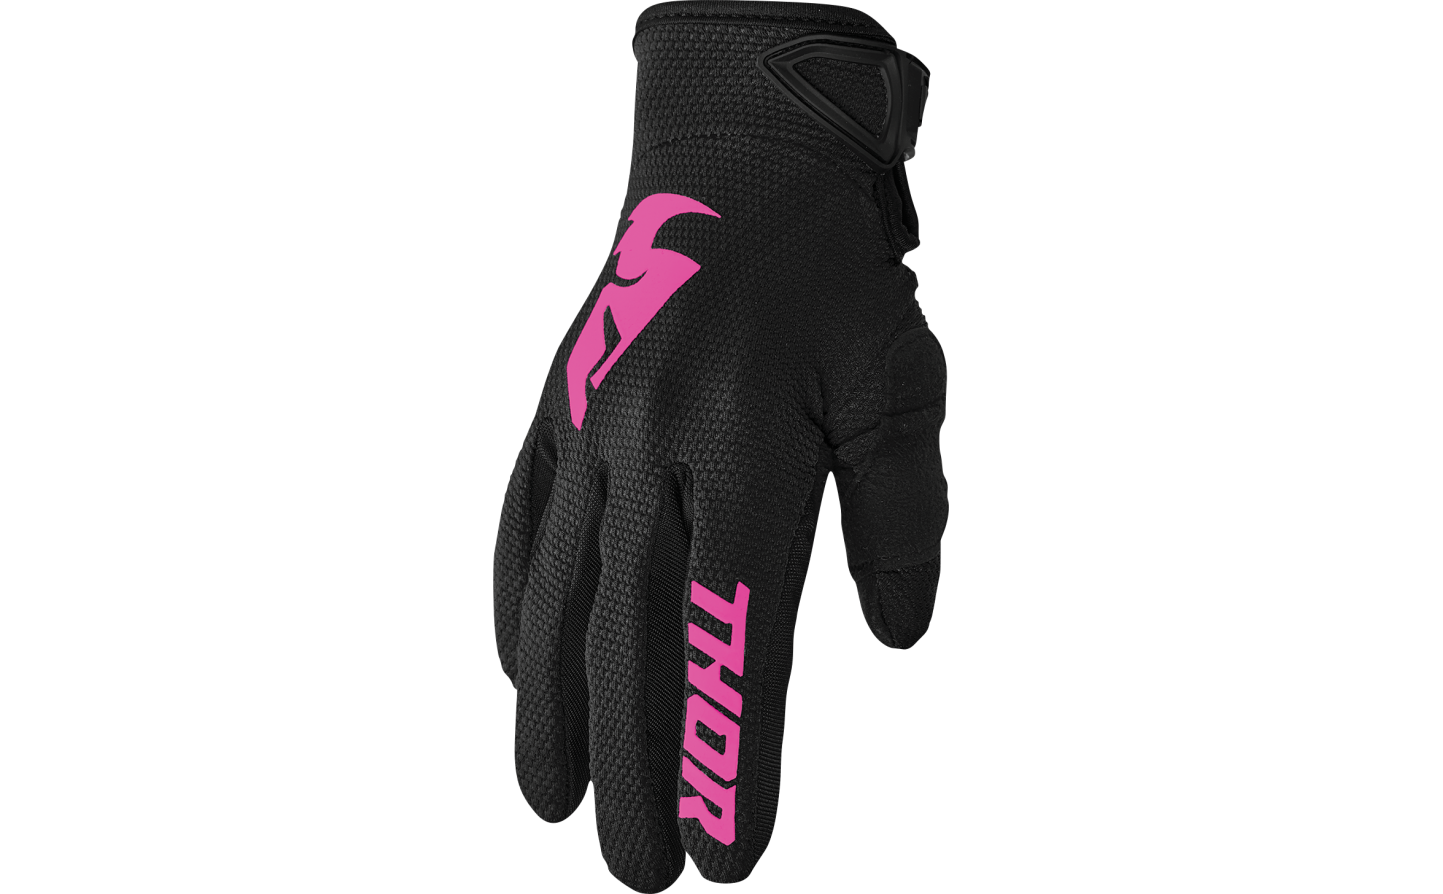 Guantes Mujer Thor Sector Negro Rosa  33310244